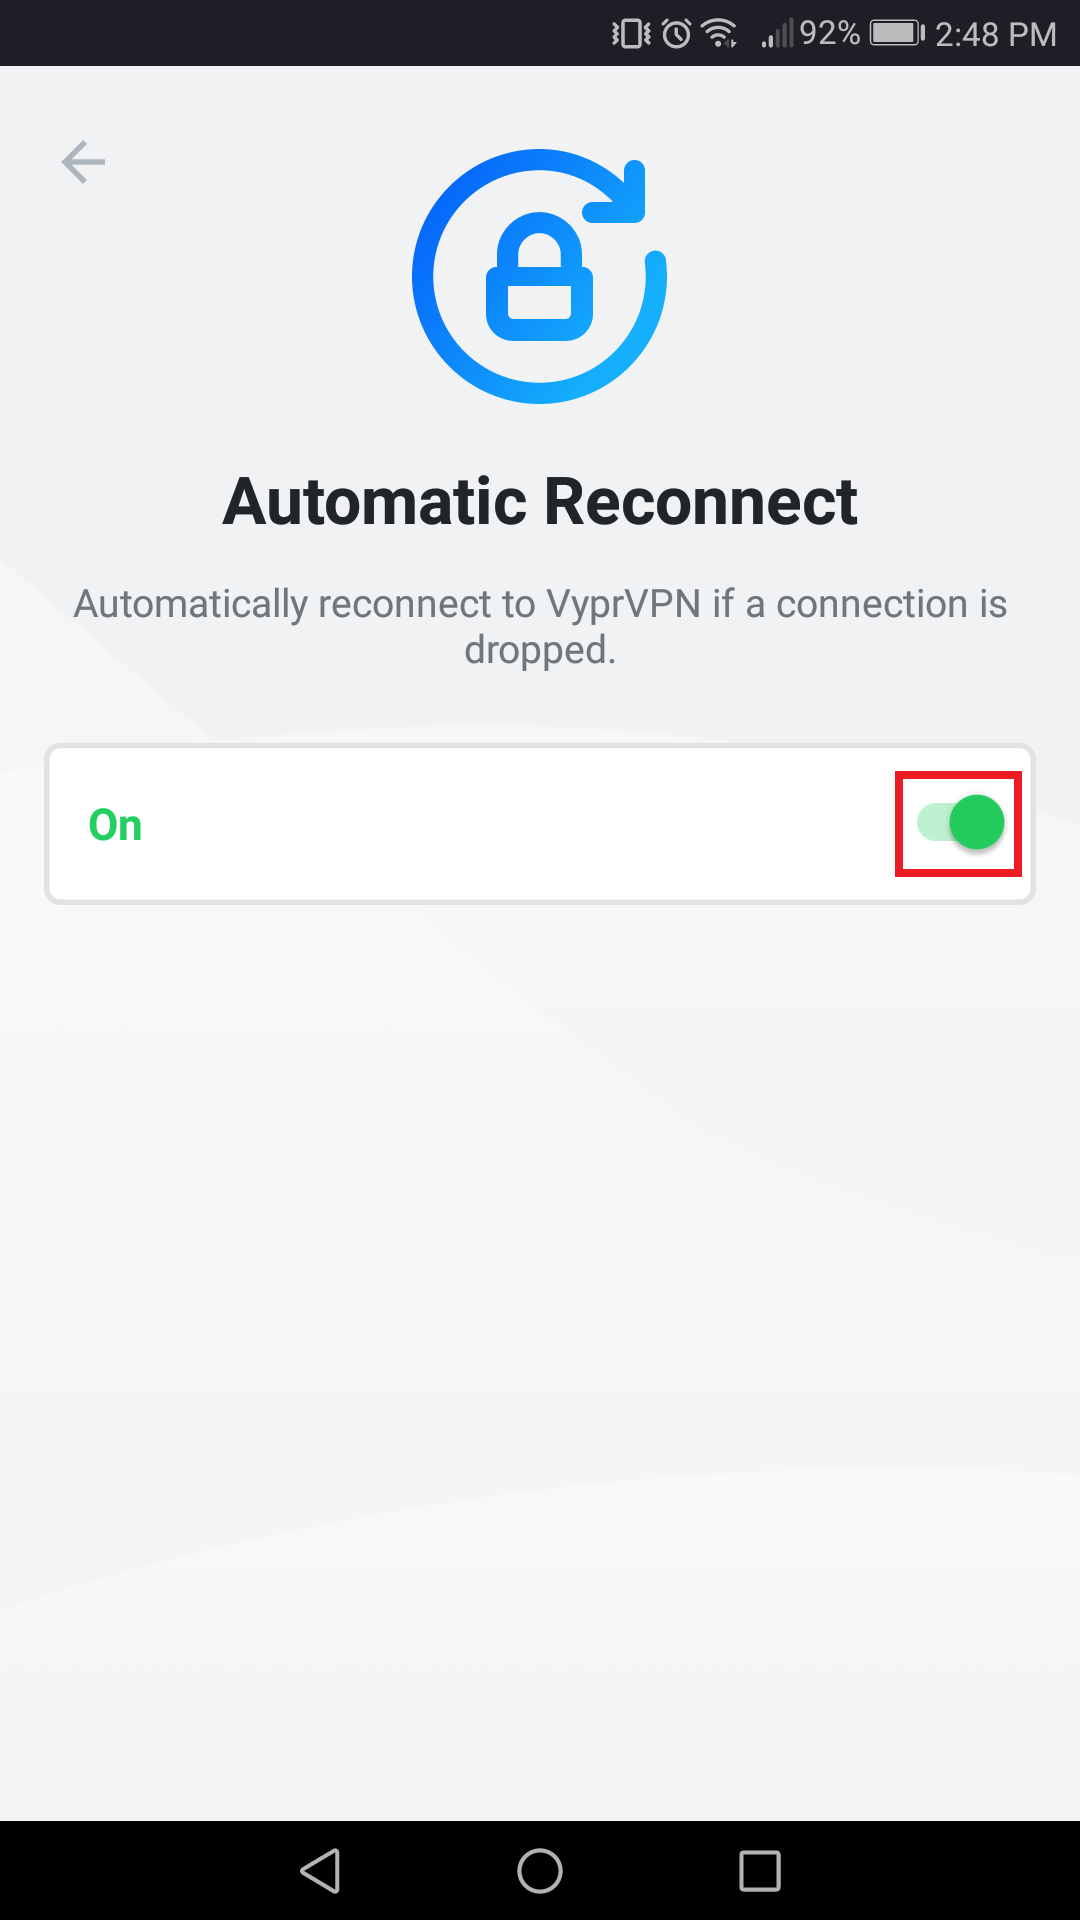 Vypr_App_-_Automatic_Reconnect_-_Toggle_Button_Selected.png